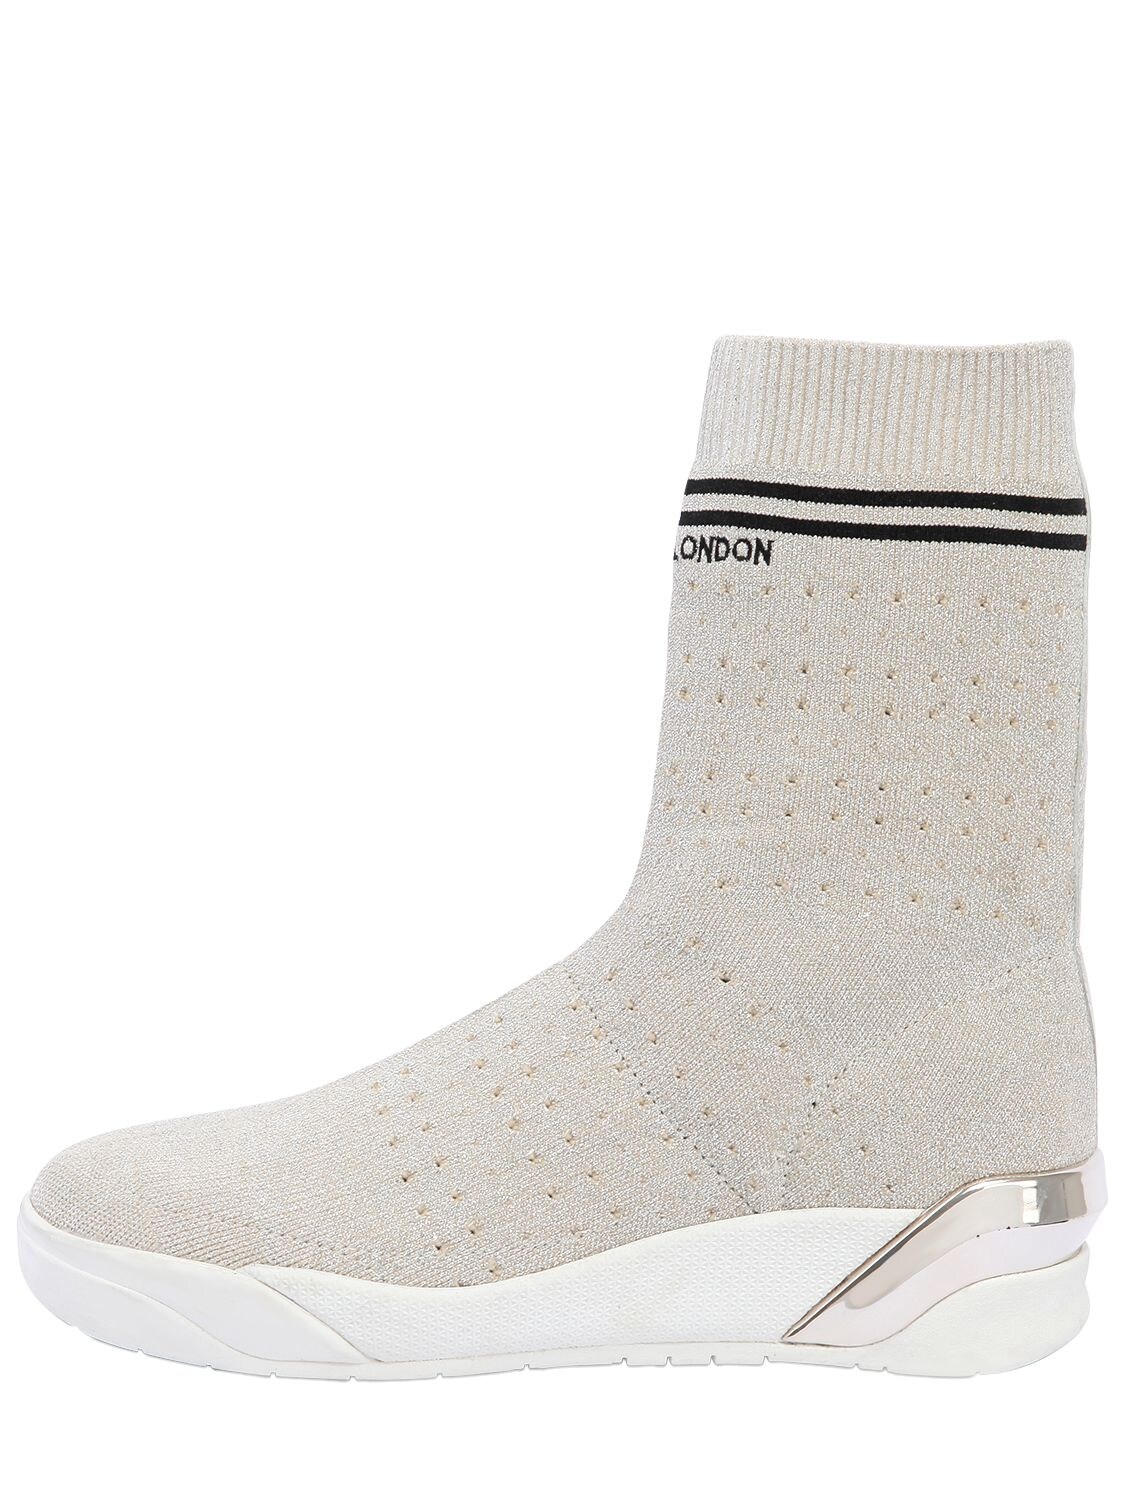 Crime 30mm Stretch Knit Sock Trainers In Platinum